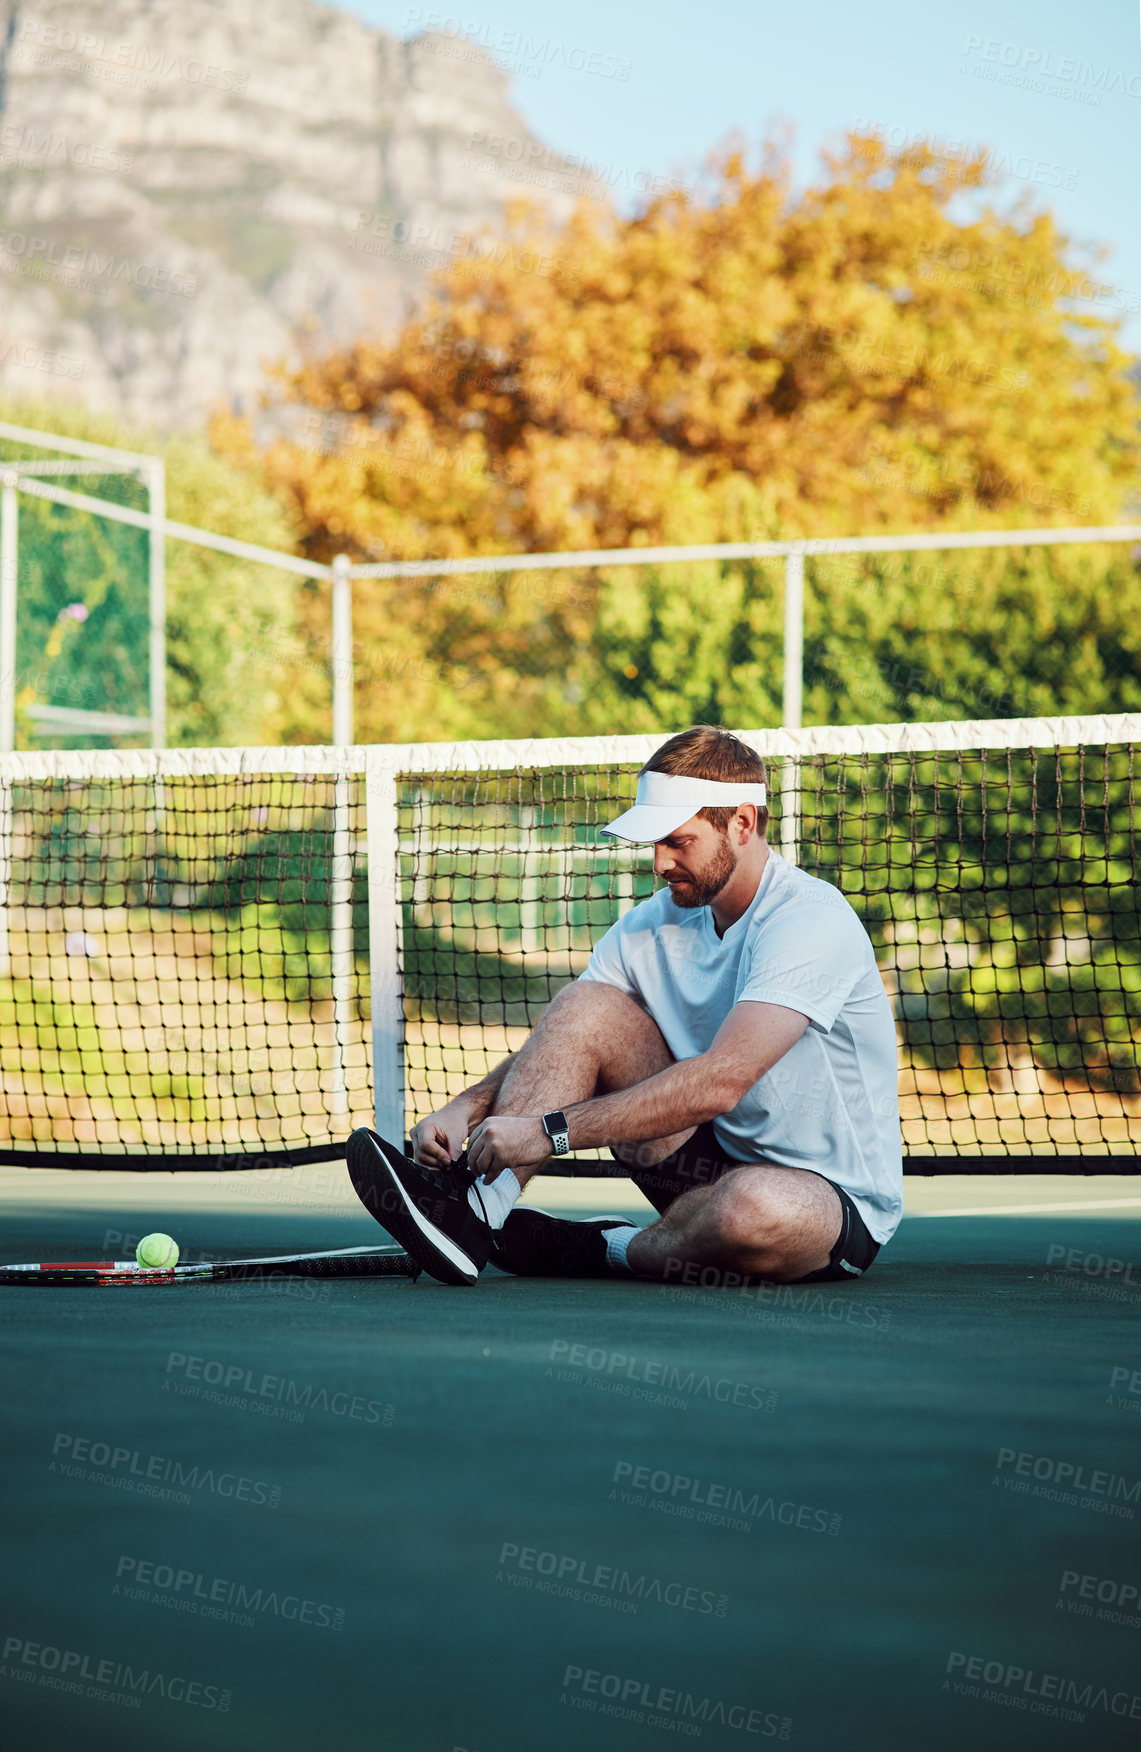 Buy stock photo Shot of a sporty young man tying his laces on a tennis court